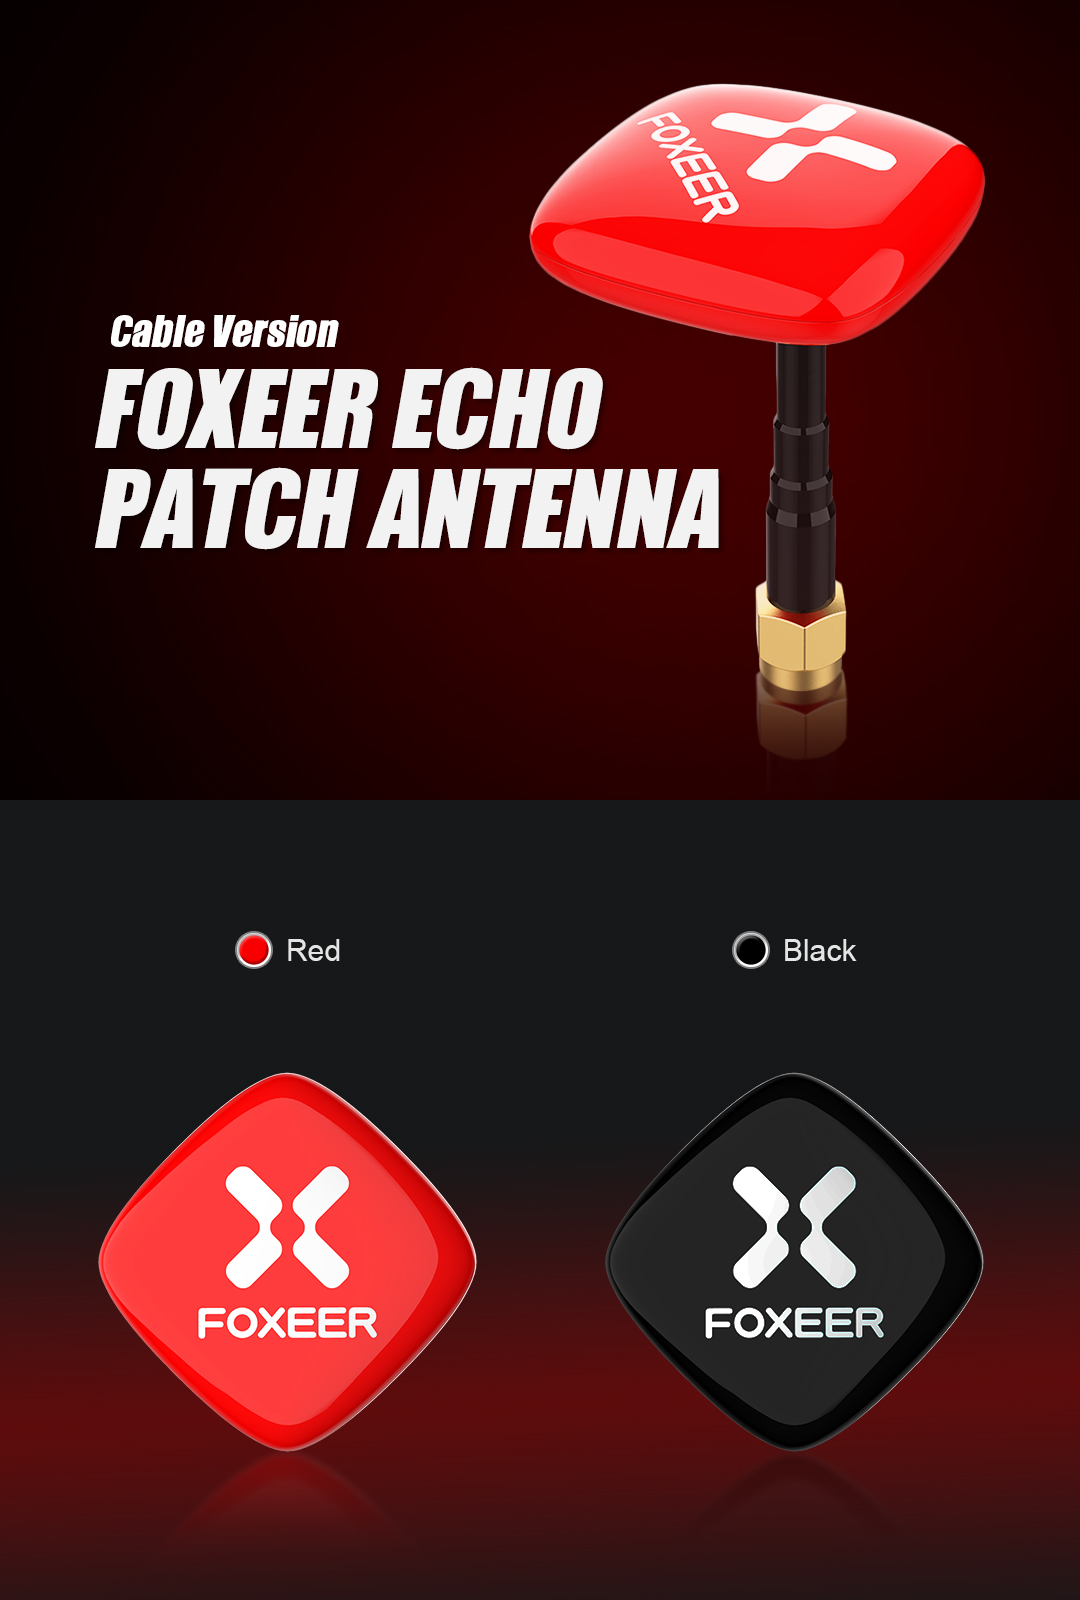 Foxeer Echo 8 dbi Patch Antenna Feeder (Red or Black - Pick Your Color) 17 - Foxeer